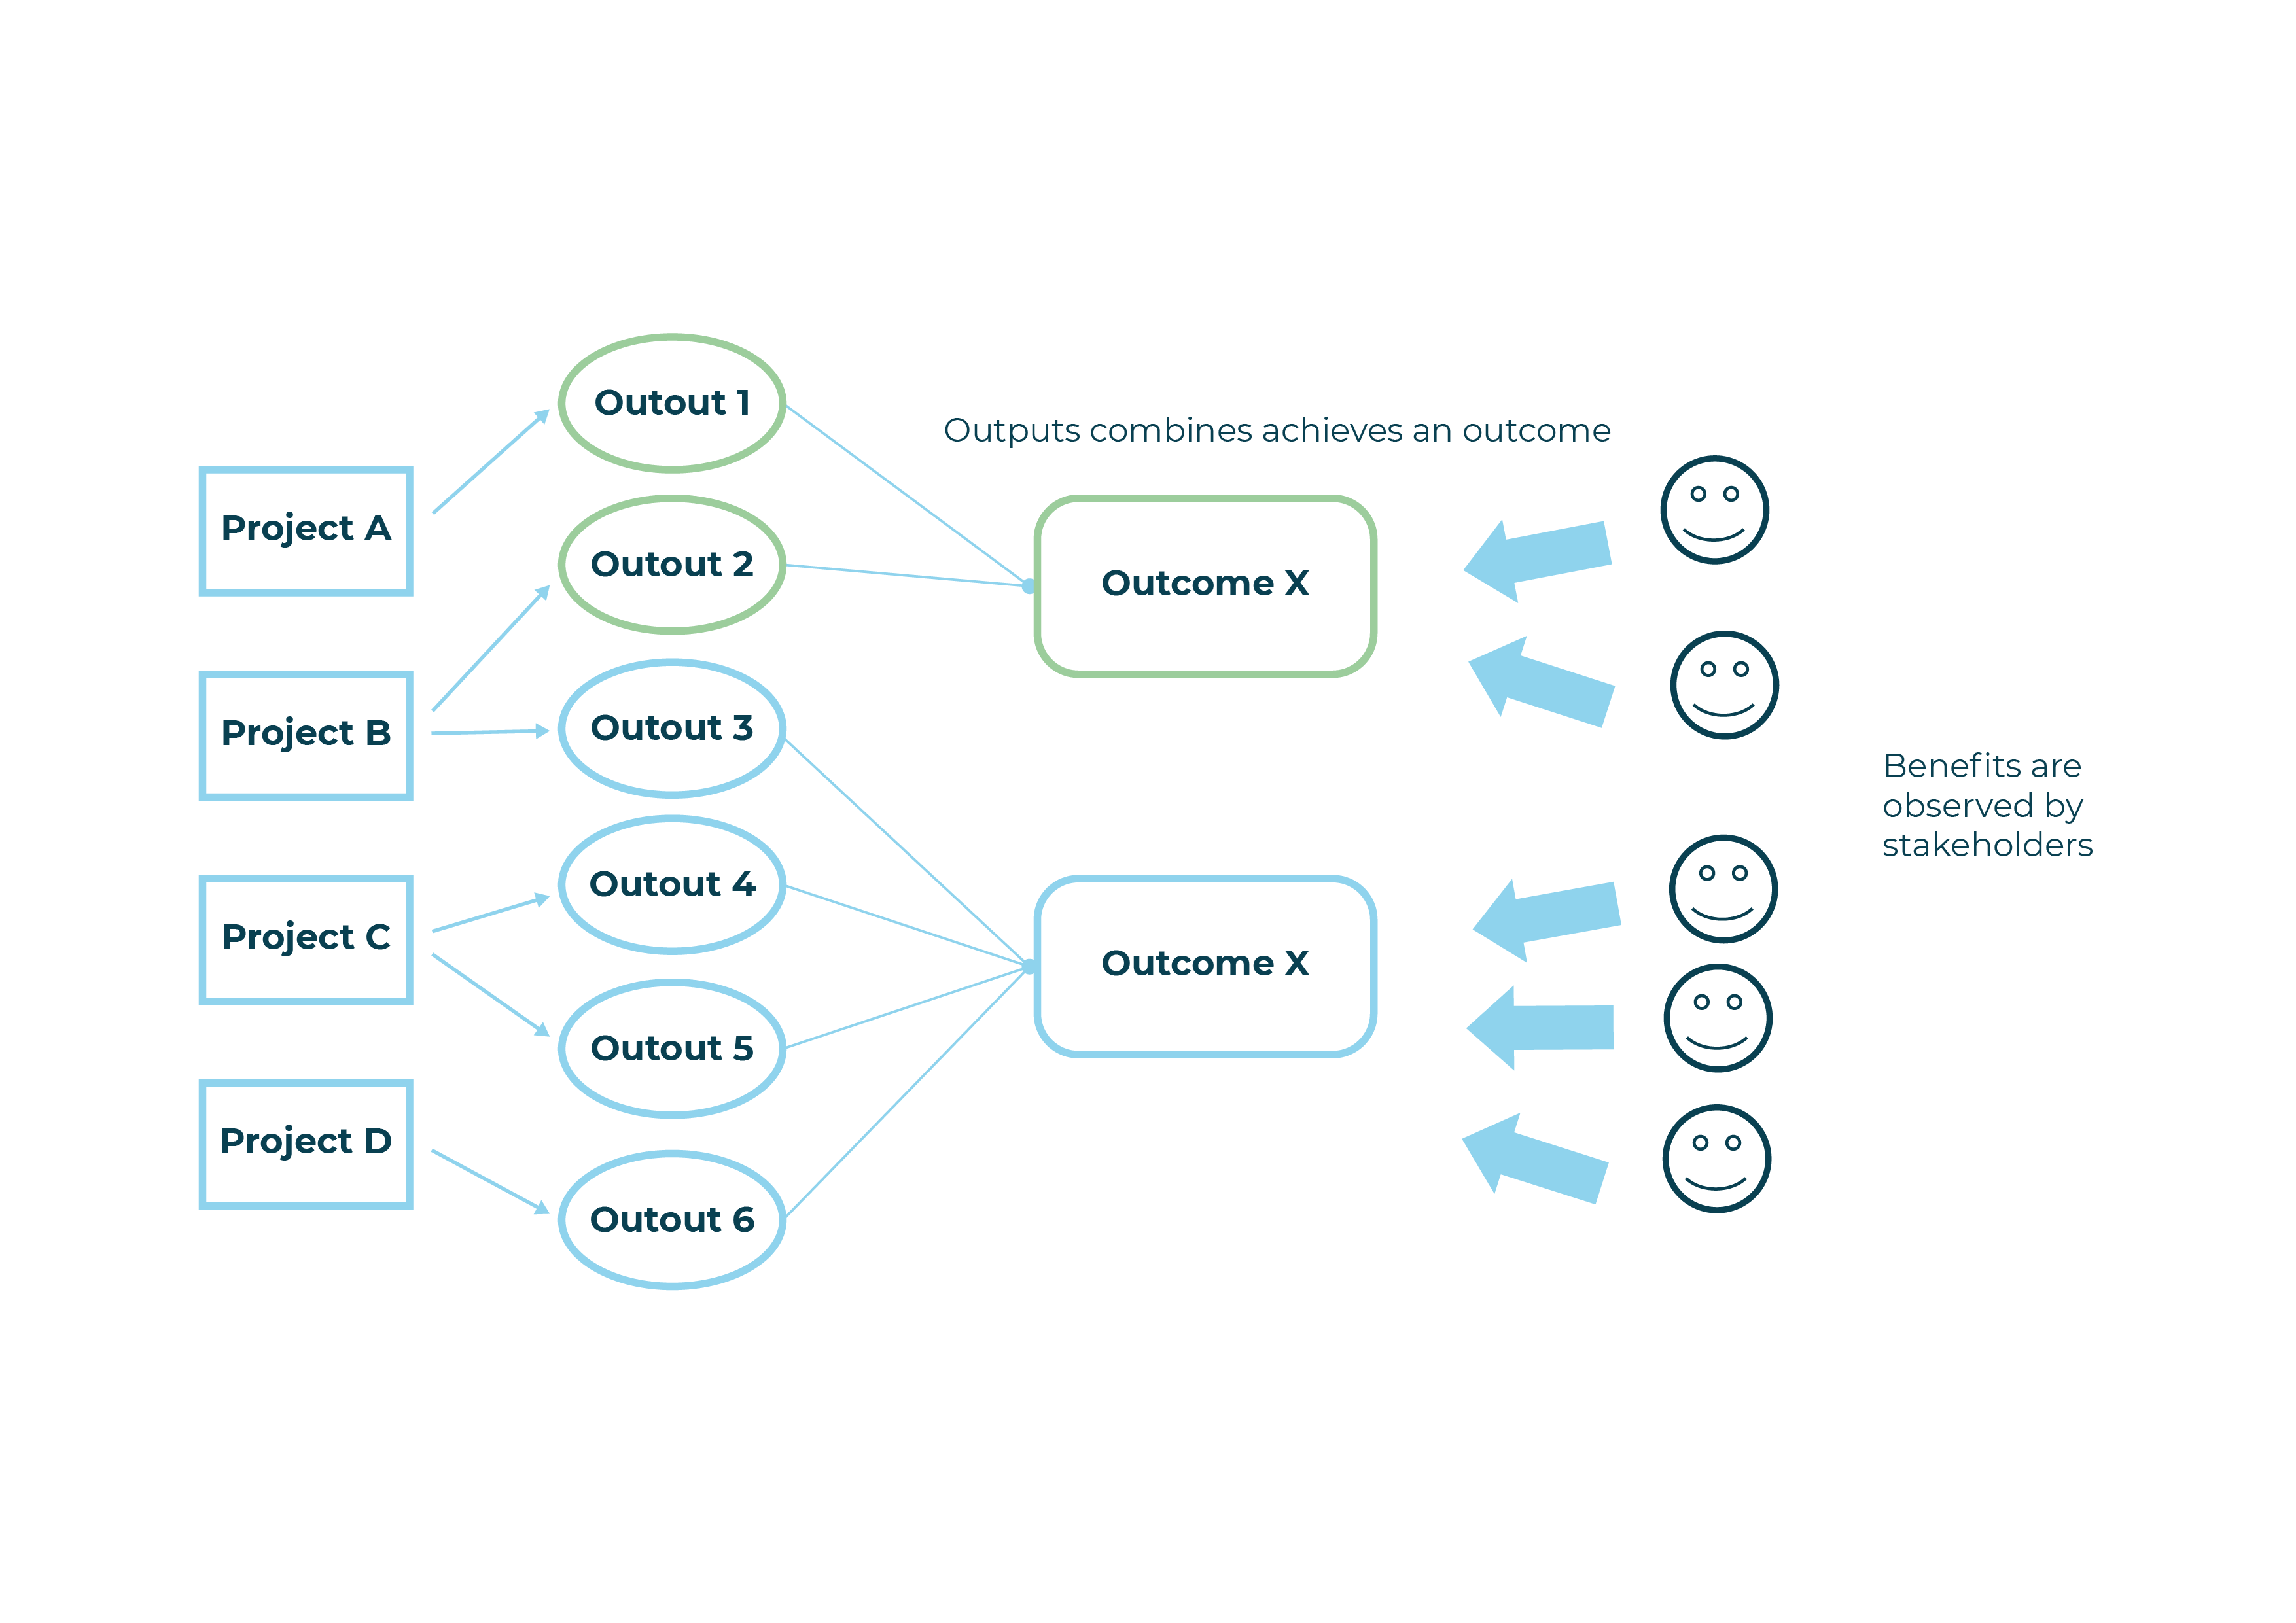 A diagram showing that outputs combined achieve an outcome